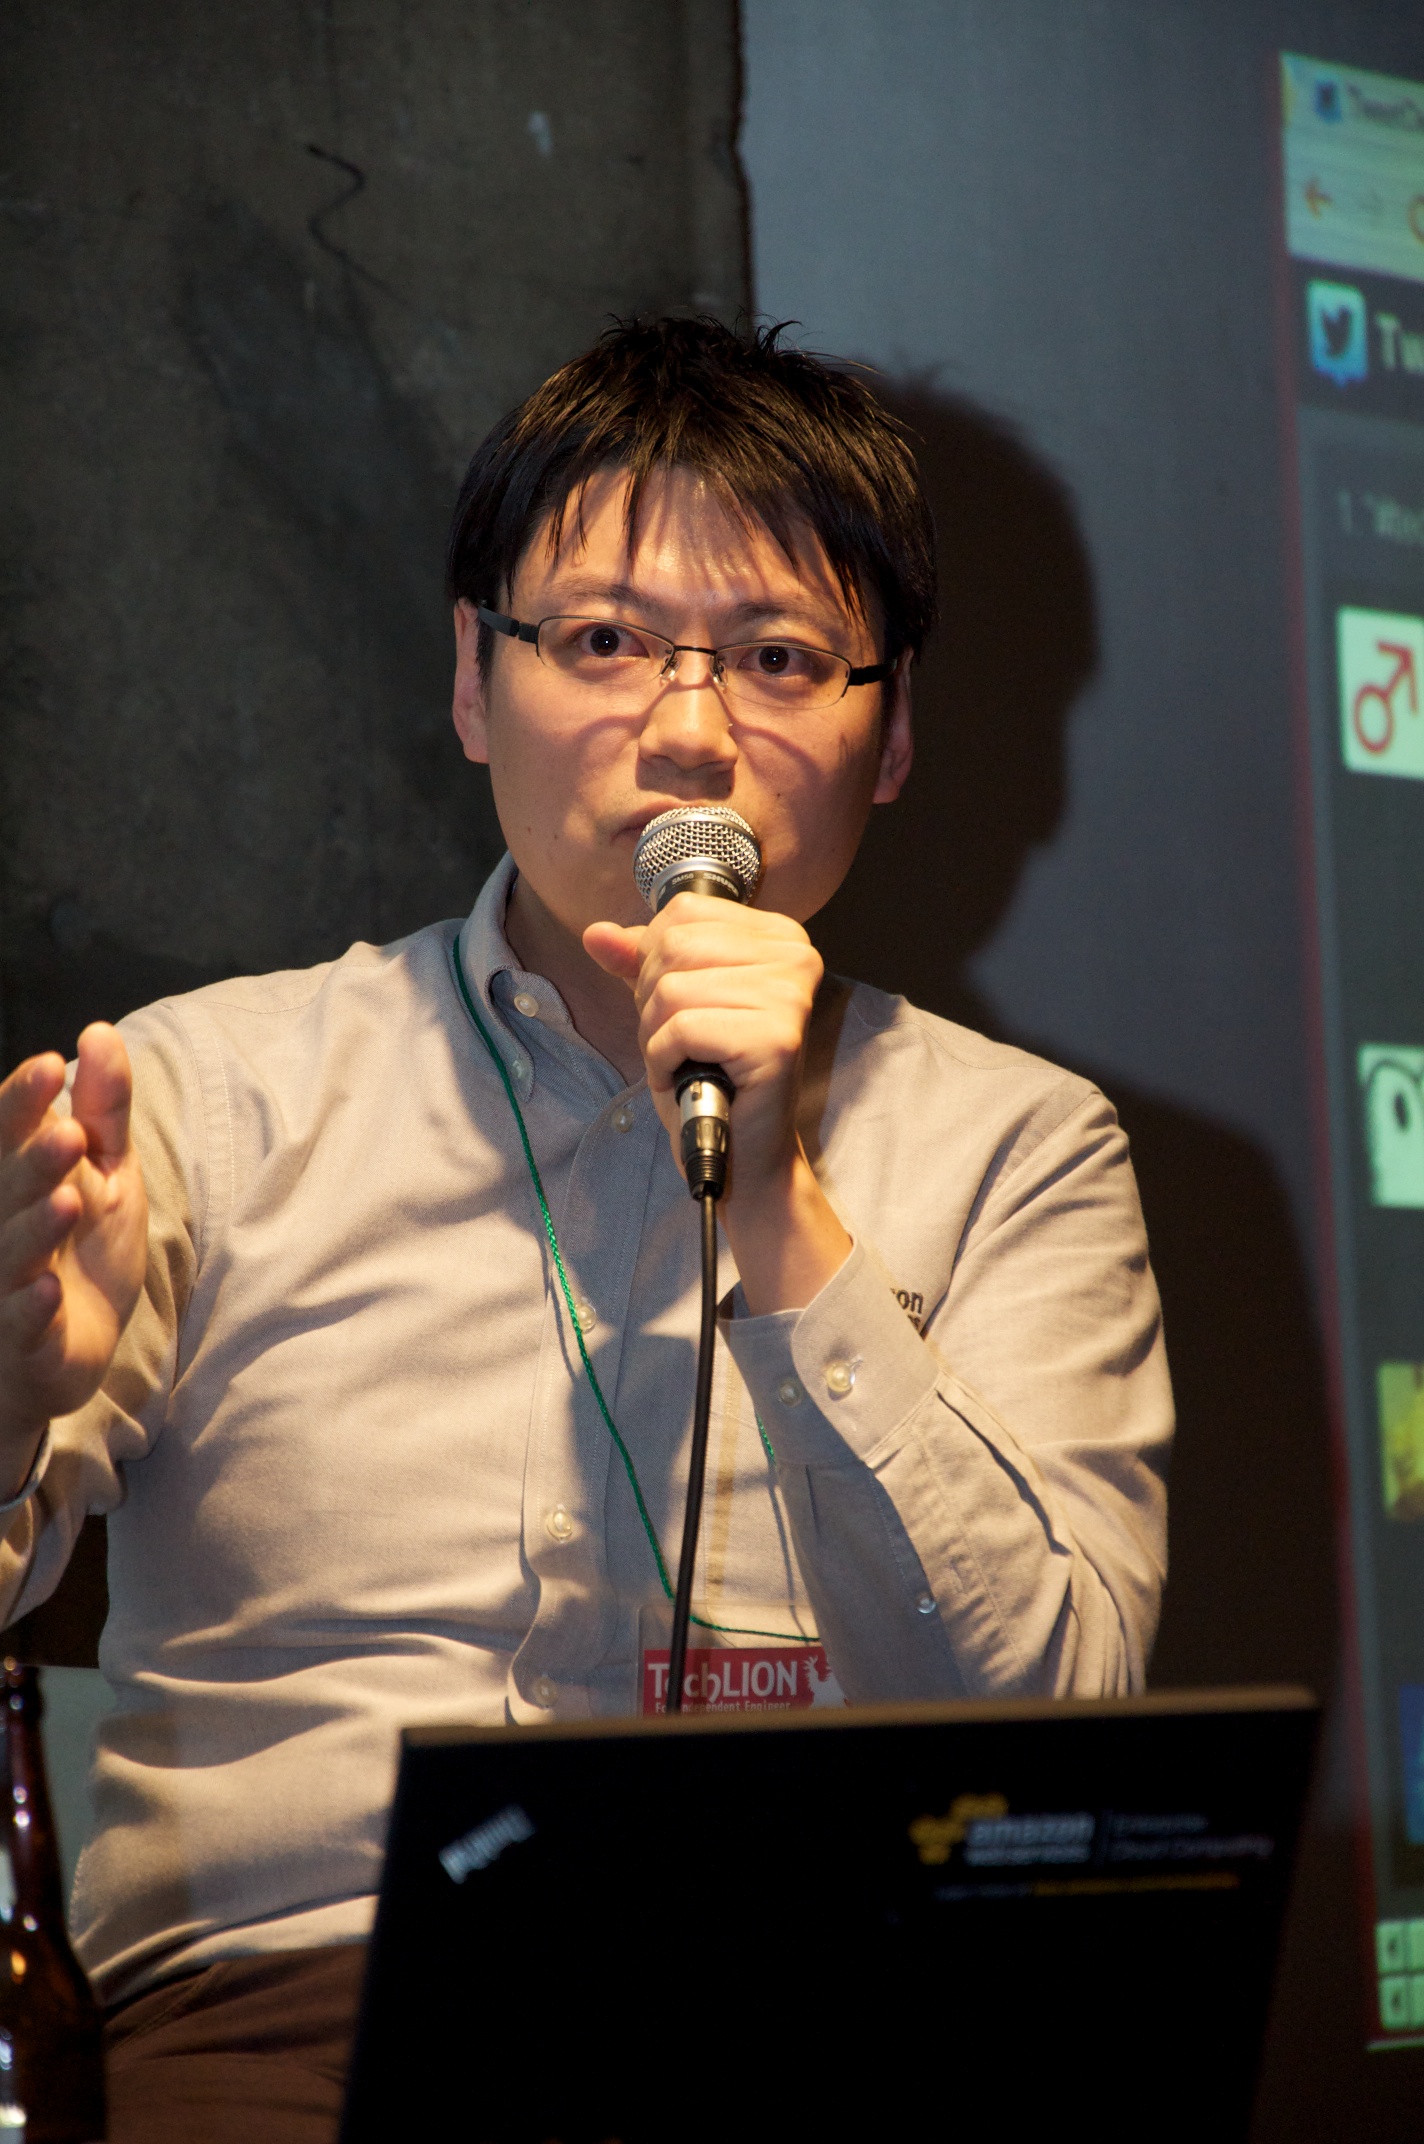 a man with glasses is holding a microphone